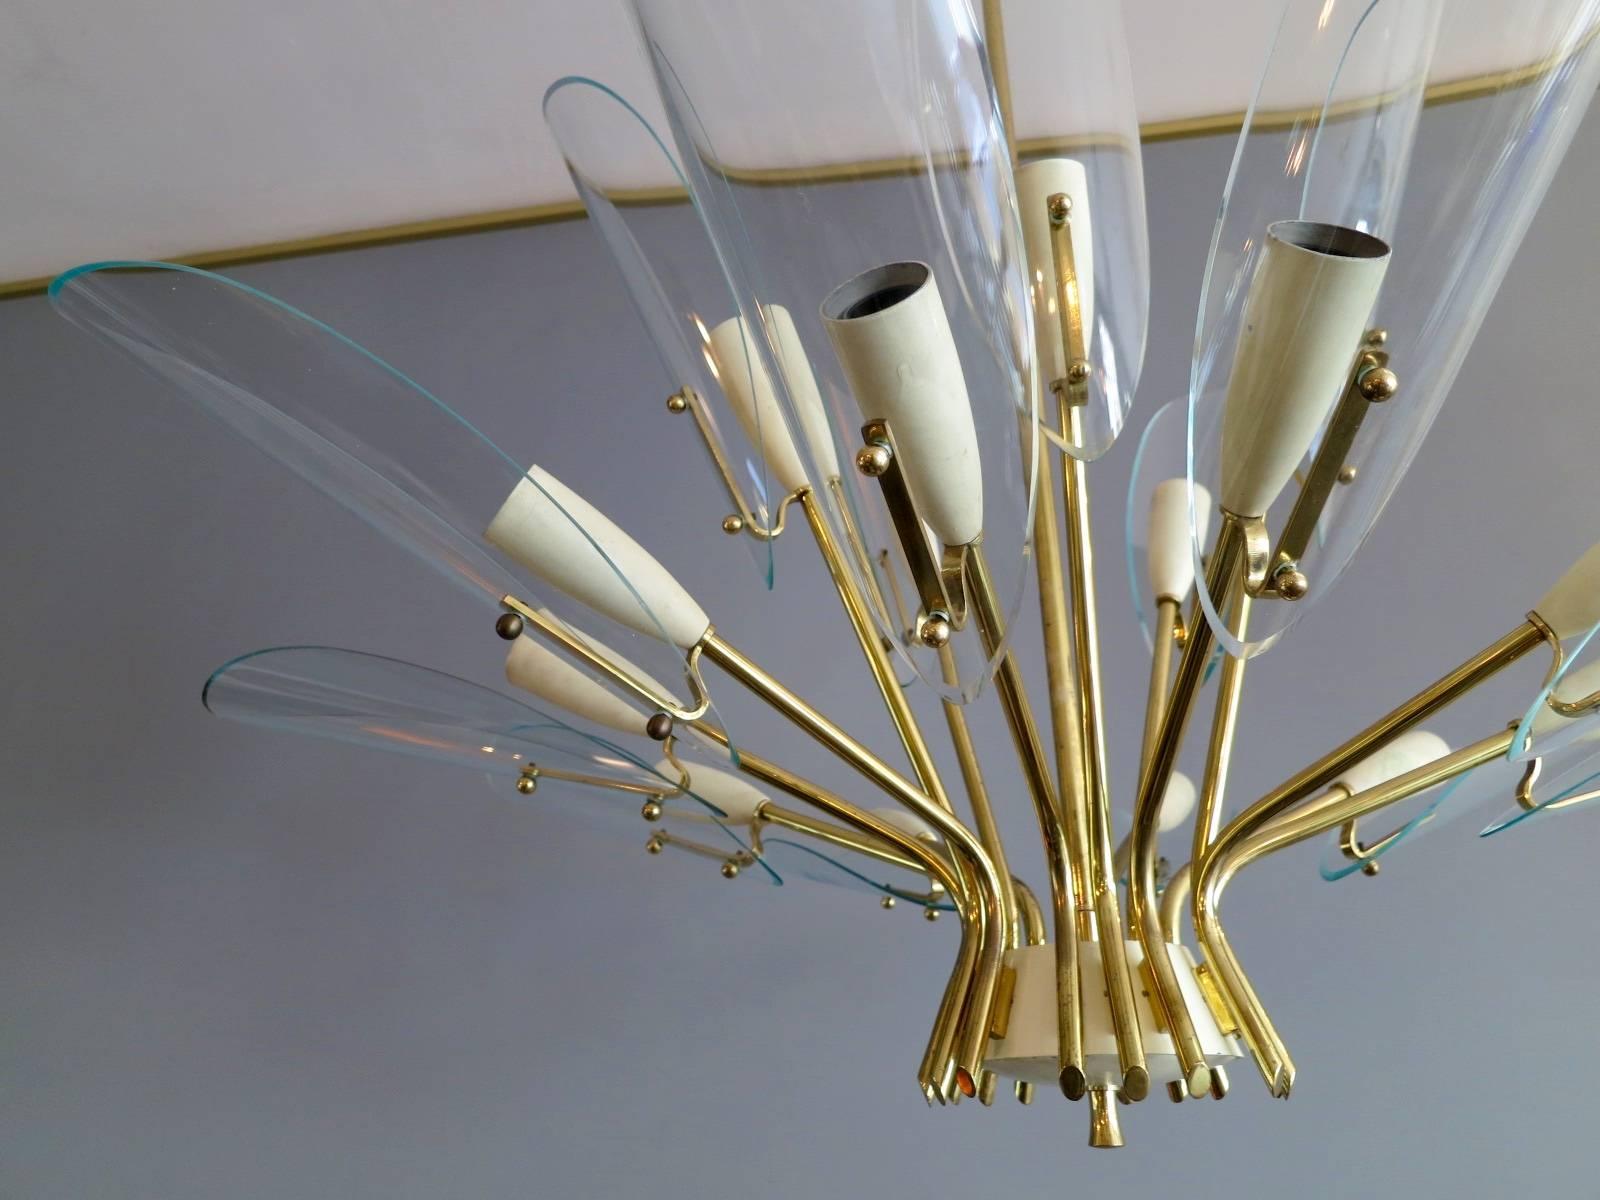 A very stylized 1950s chandelier in brass with ivory accents and large glass leaf shaped diffusers. There are fifteen-light fittings over two tiers. A well manufactured piece from one of Italy's finer production companies.